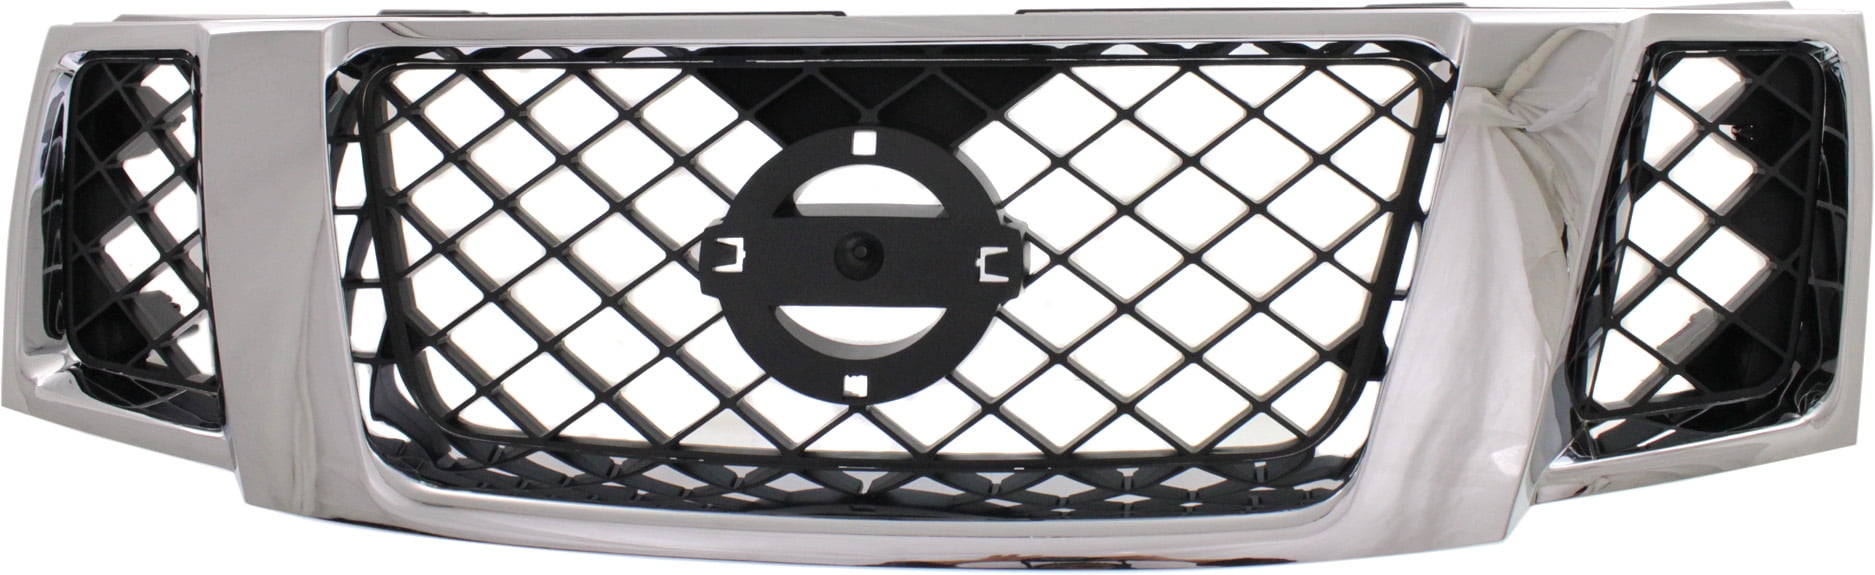 Grille Assembly Compatible With 2008-2012 Nissan Pathfinder Chrome